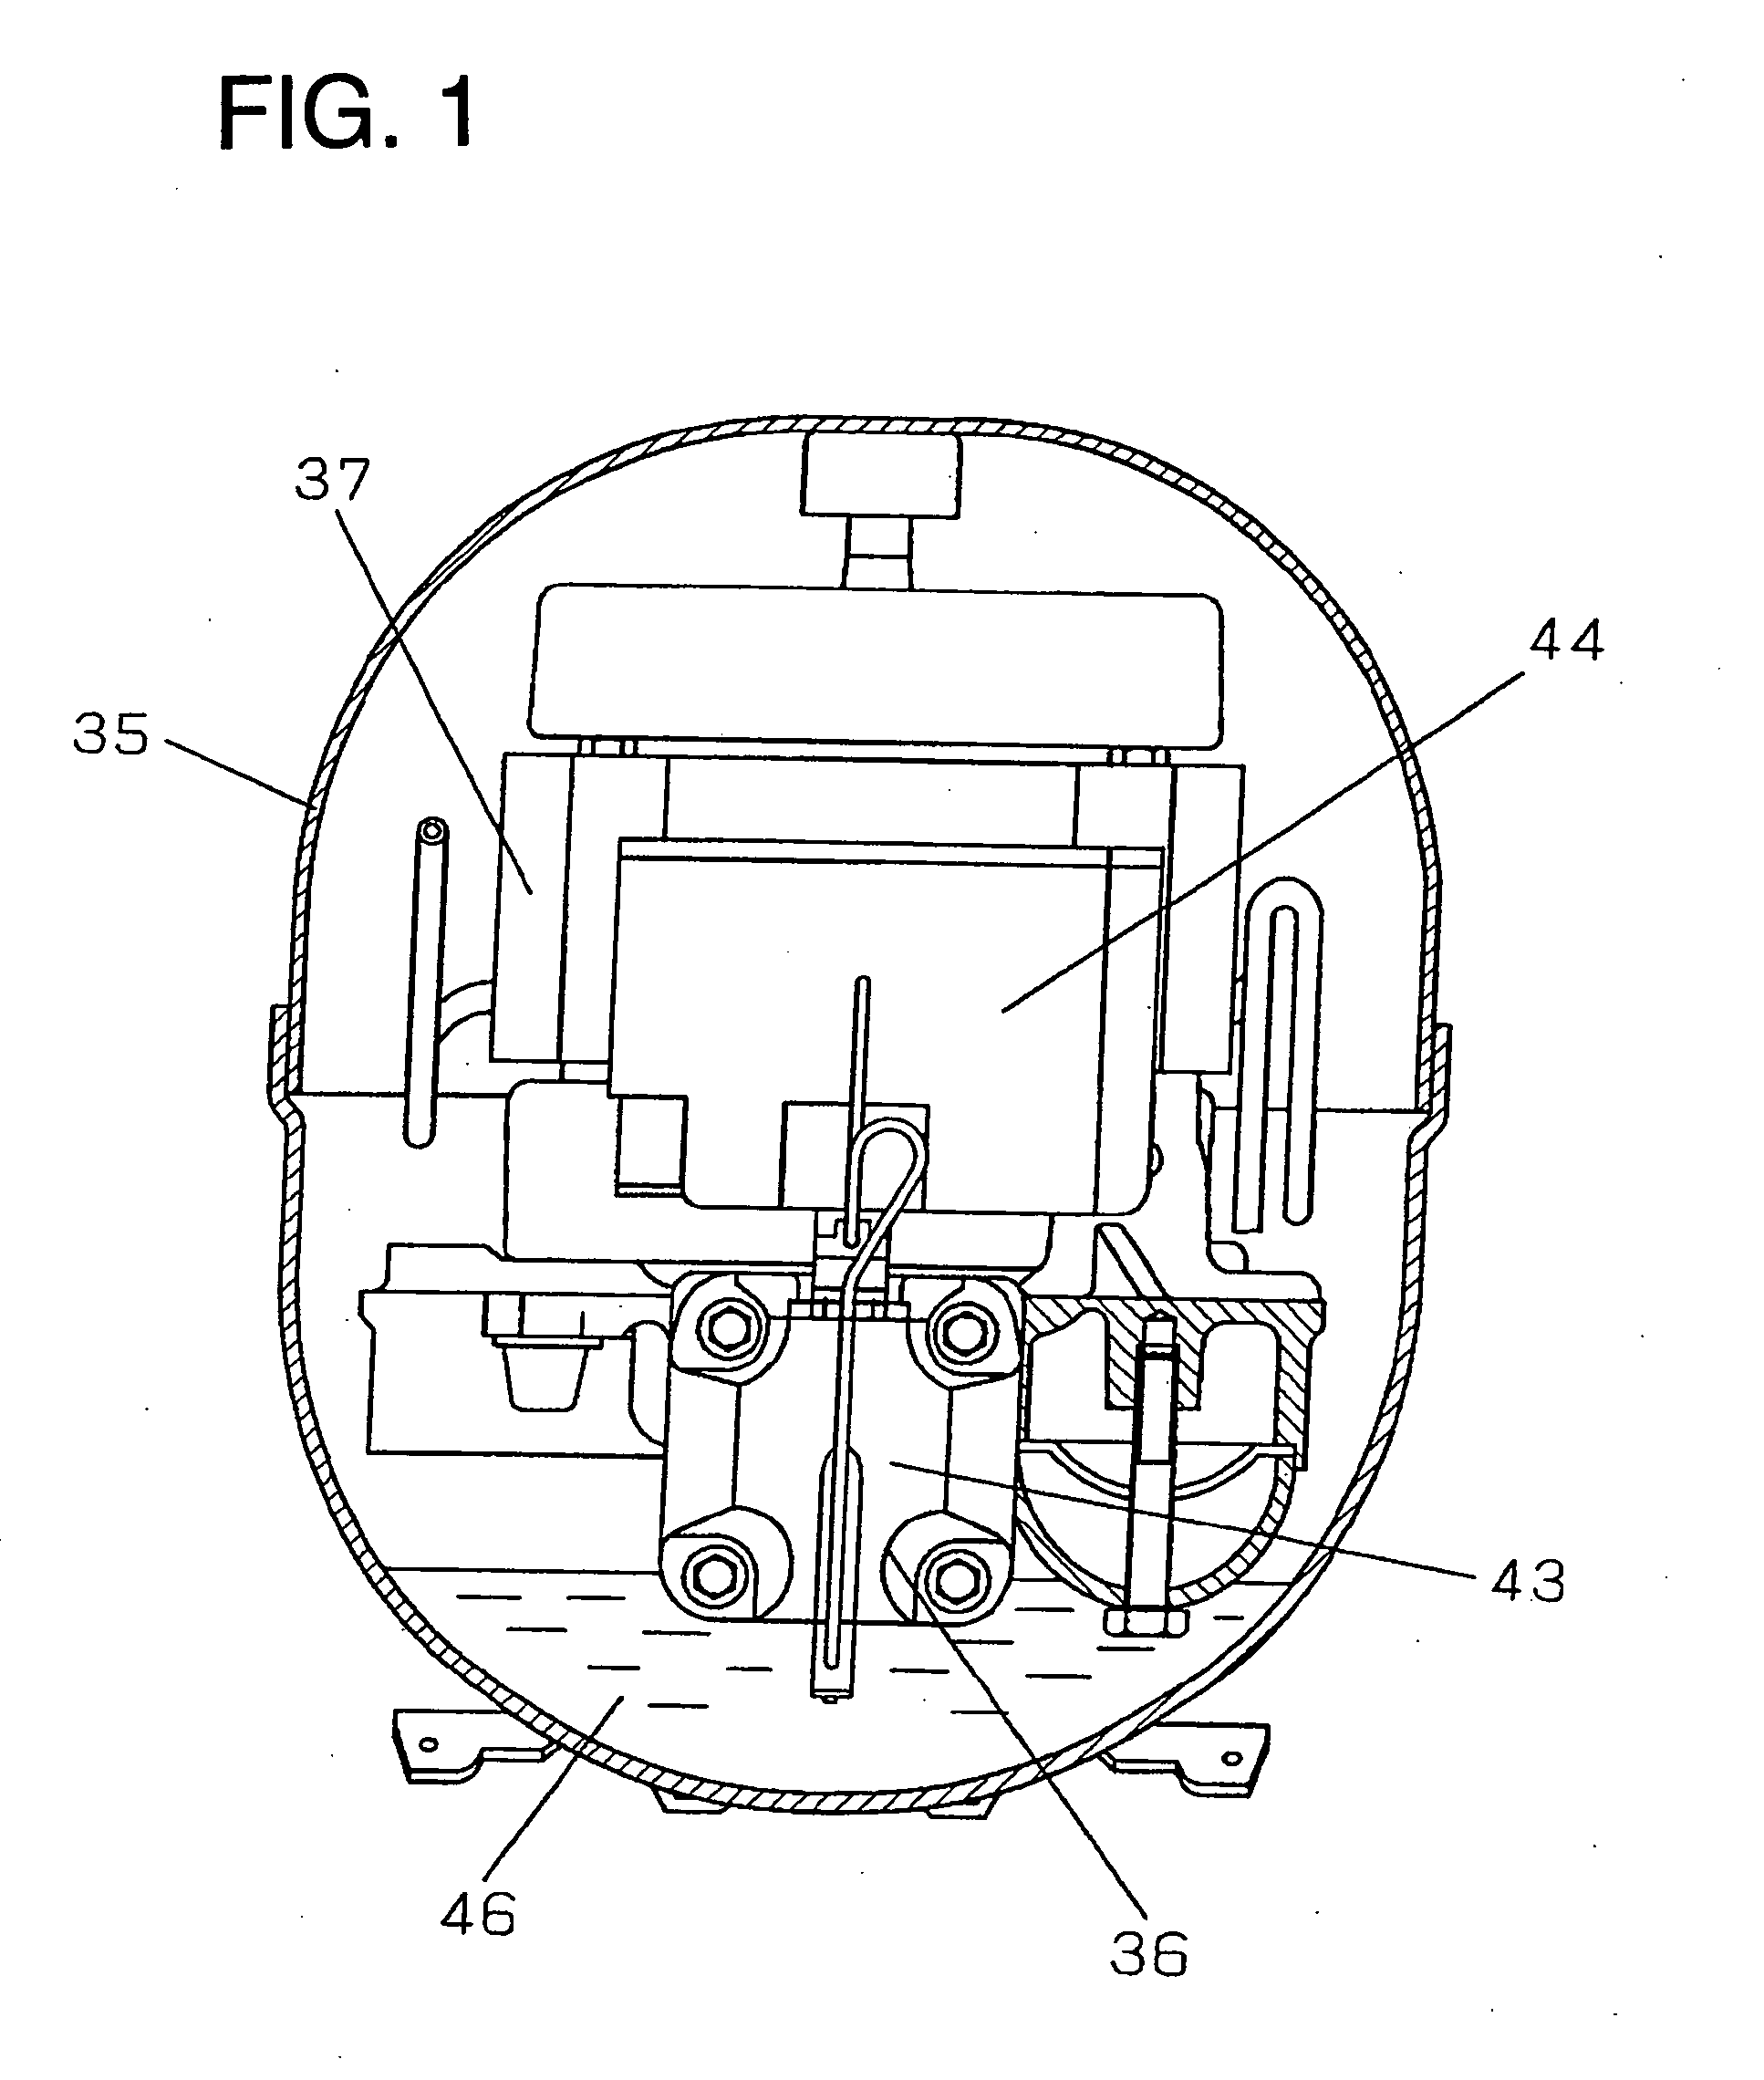 Hermetic compressor and freezing air-conditioning system